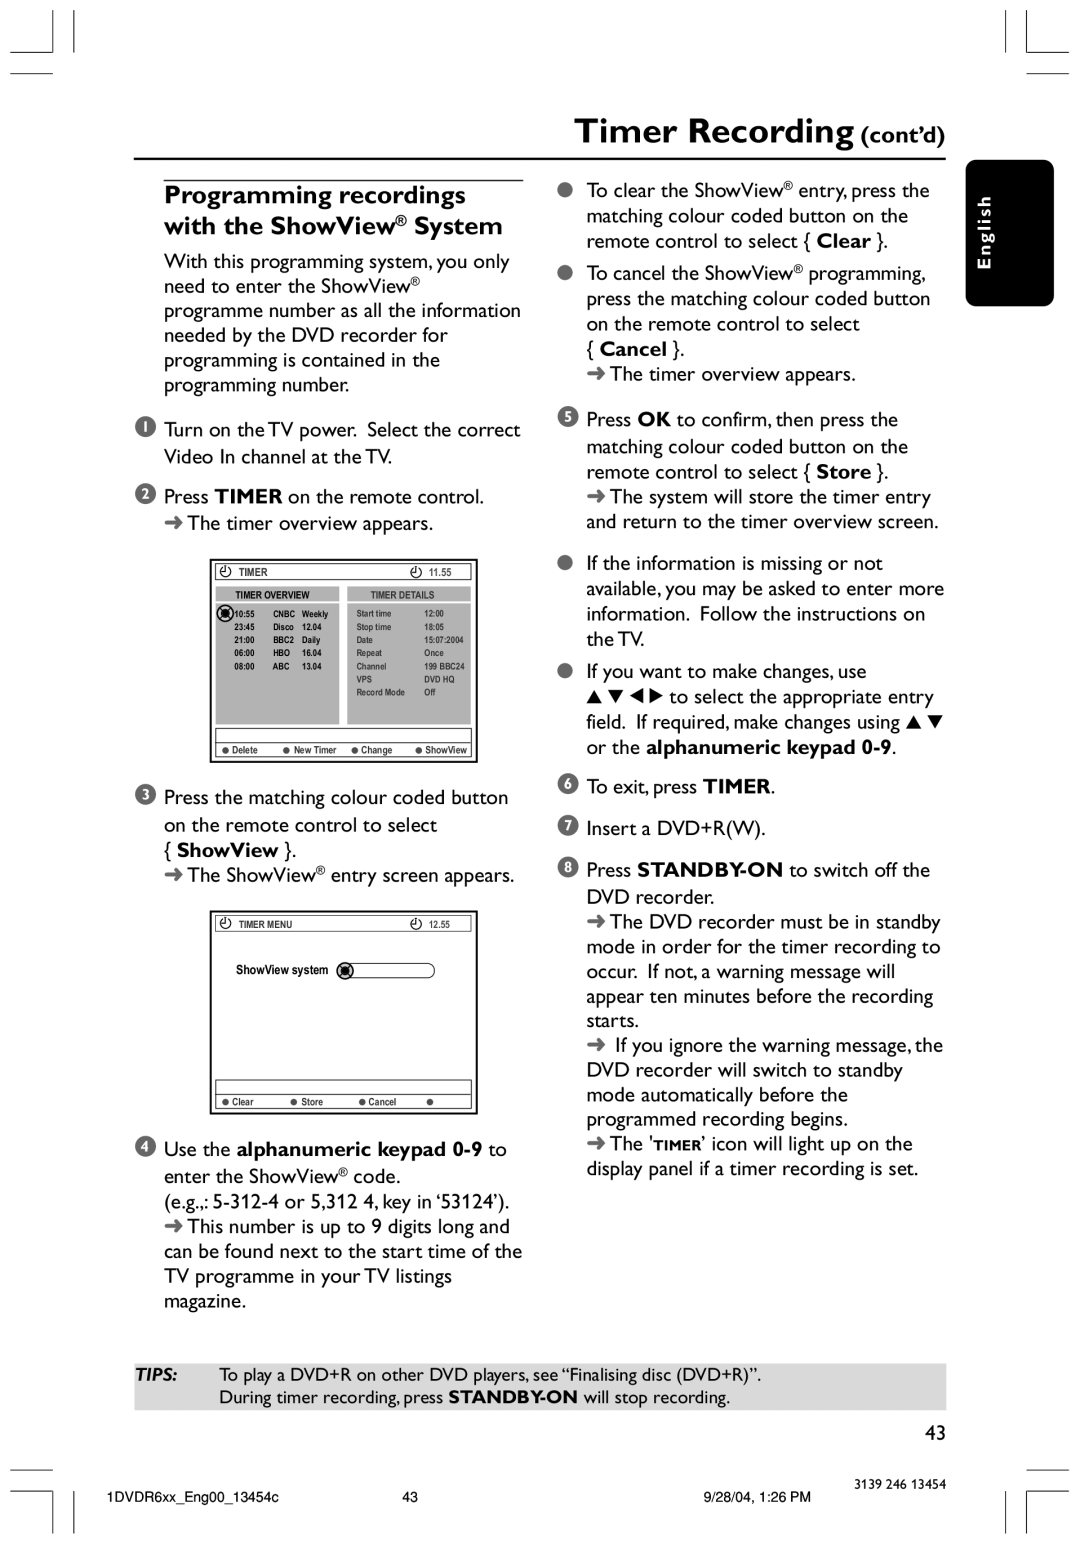 Philips DVDR612/97 user manual Timer Recording cont’d, Programming recordings with the ShowView System, Cancel 